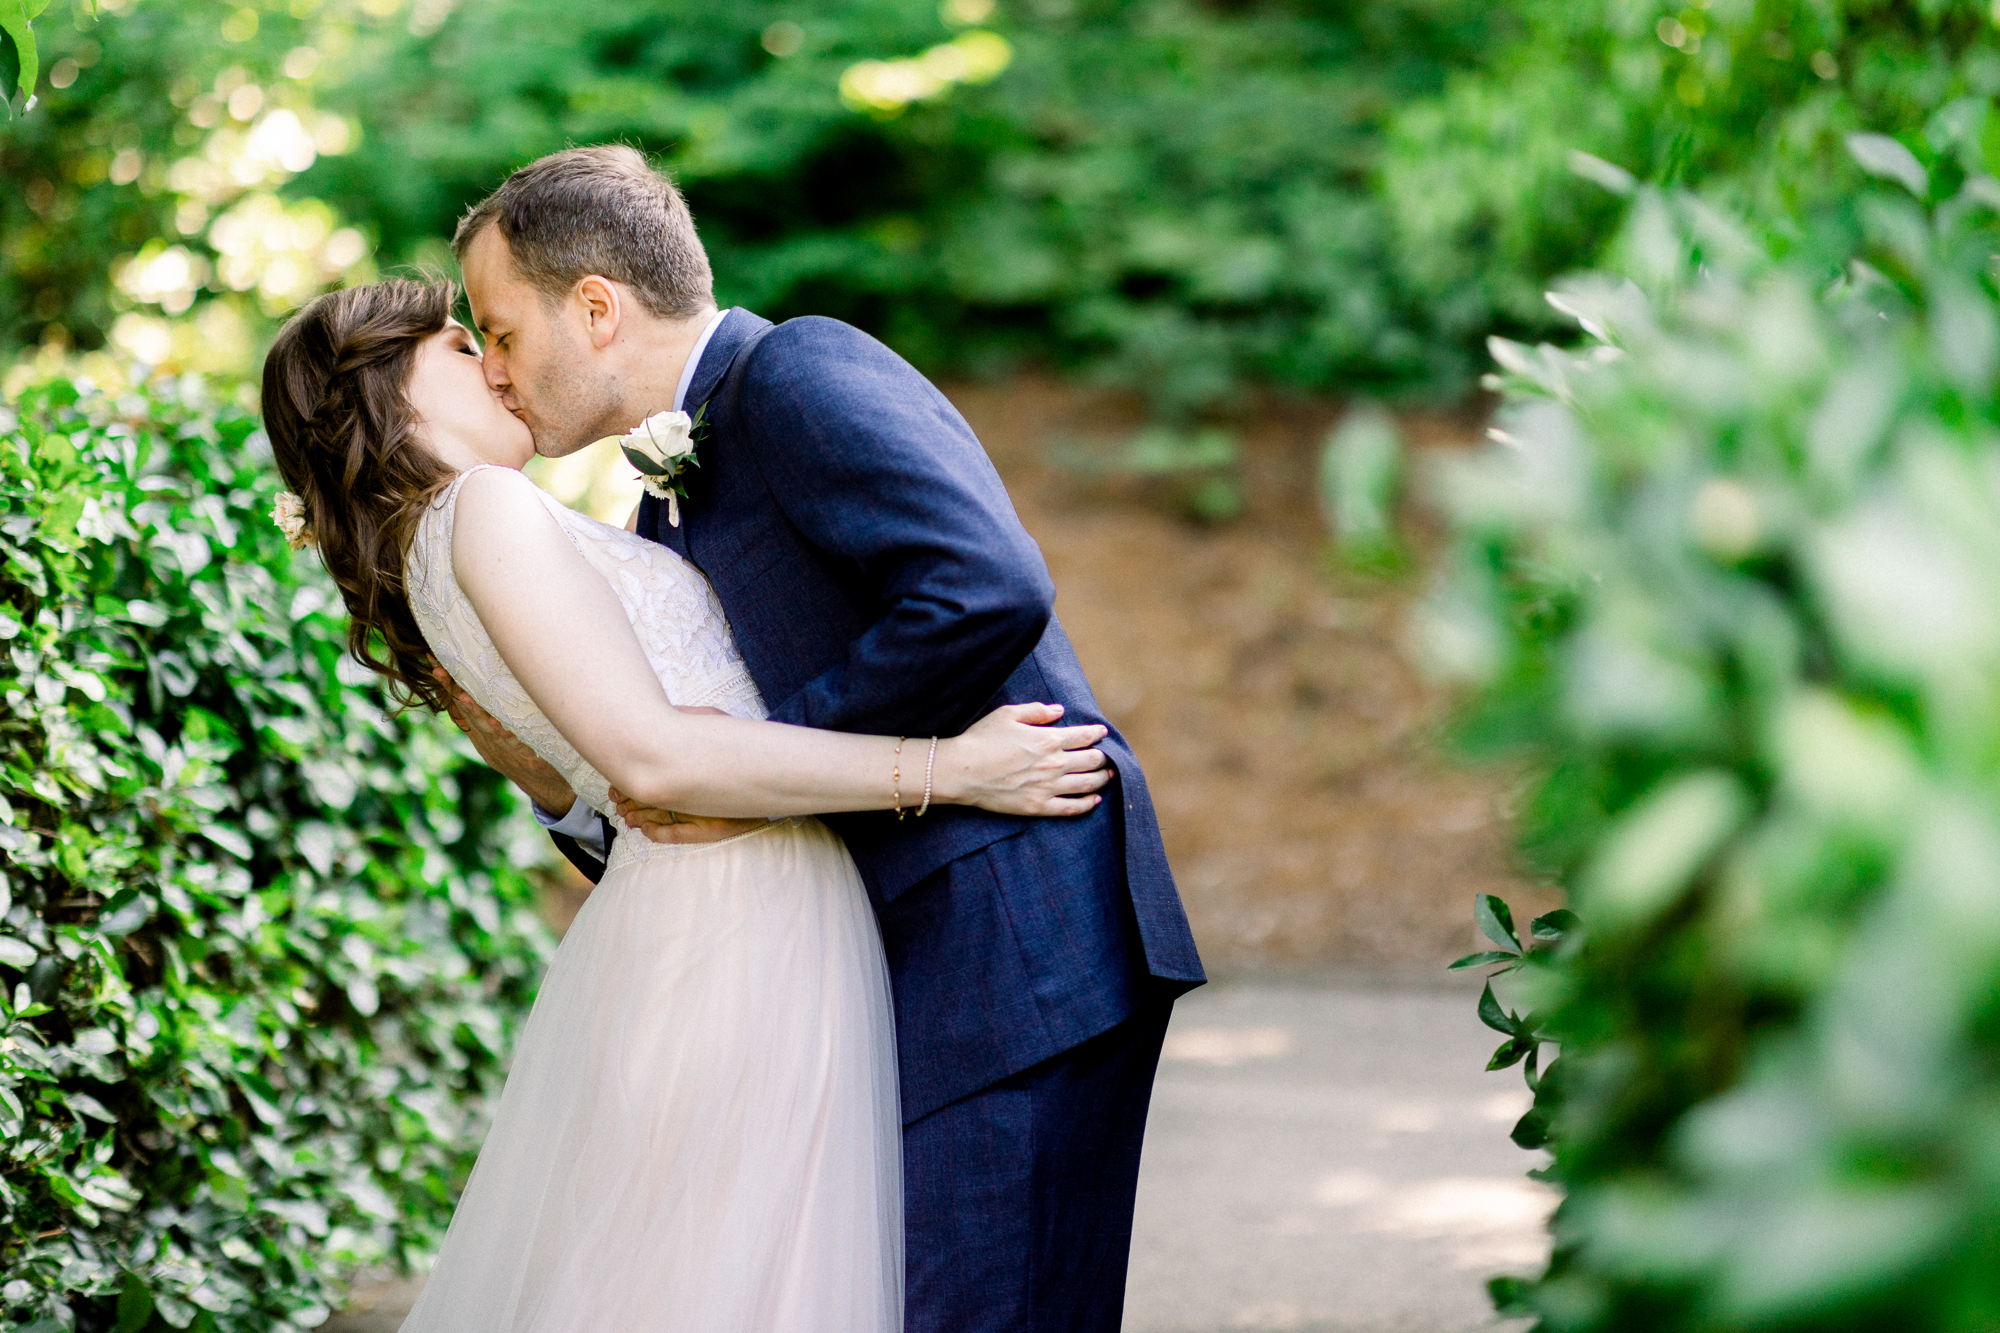 Lovely Summer Wedding Photos at the Conservatory Garden in Central Park New York